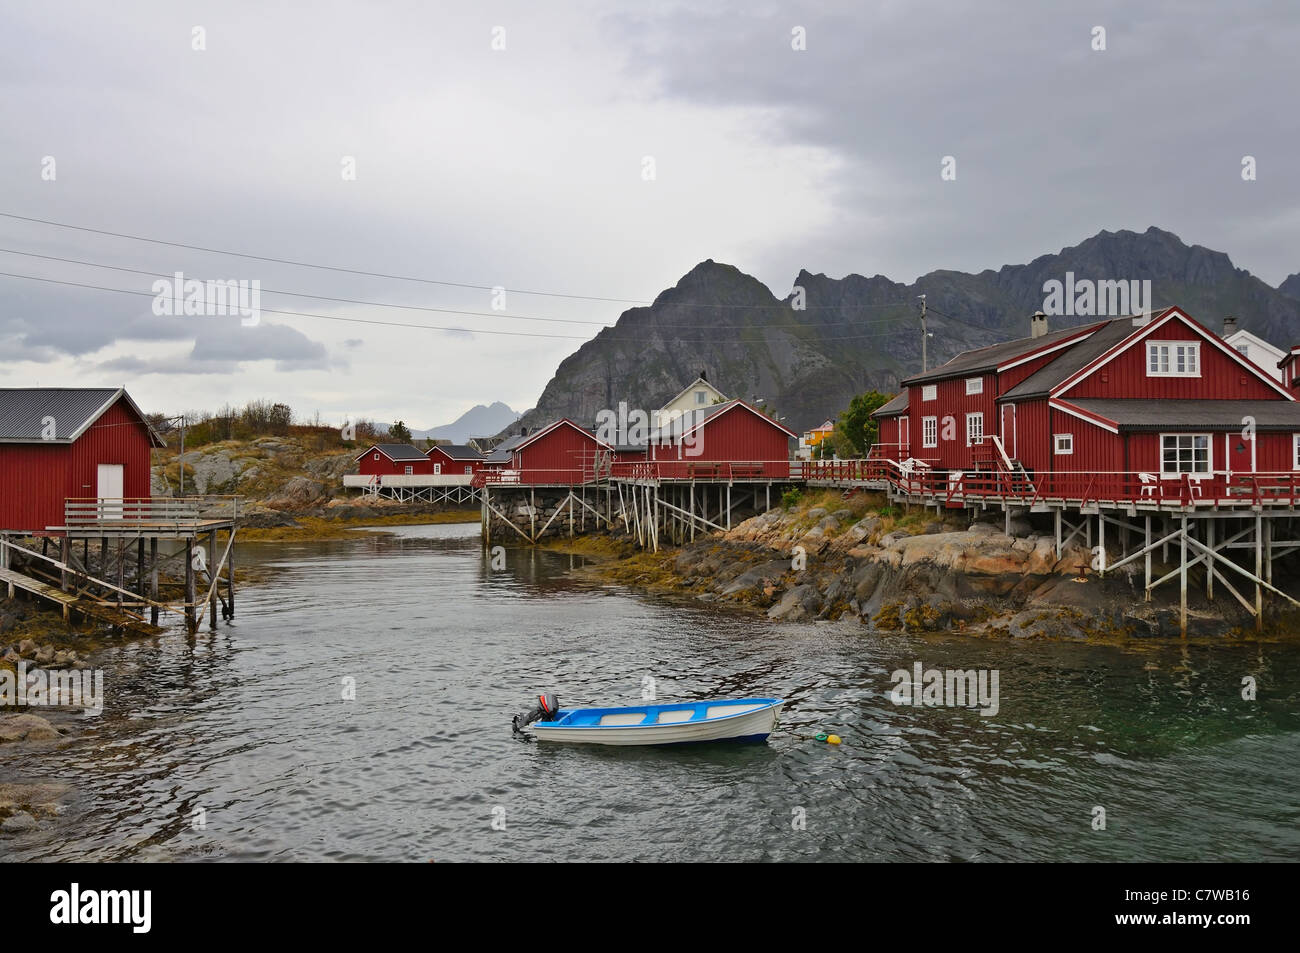 Typical Norwegian fishing huts 'rorbu' in the village Henningsvaer. Stock Photo